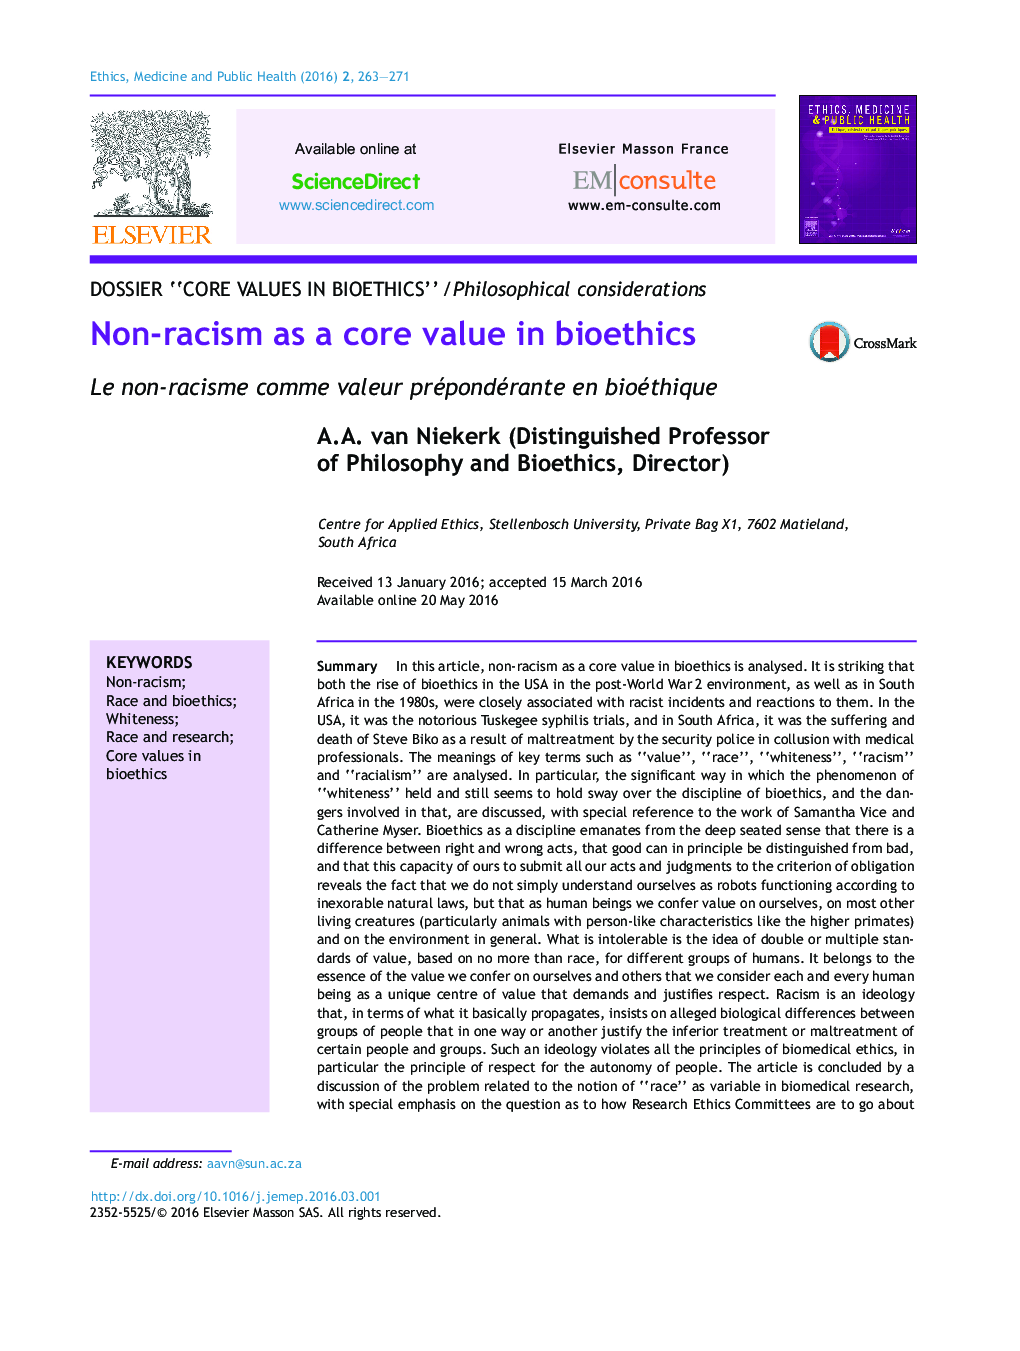 Non-racism as a core value in bioethics